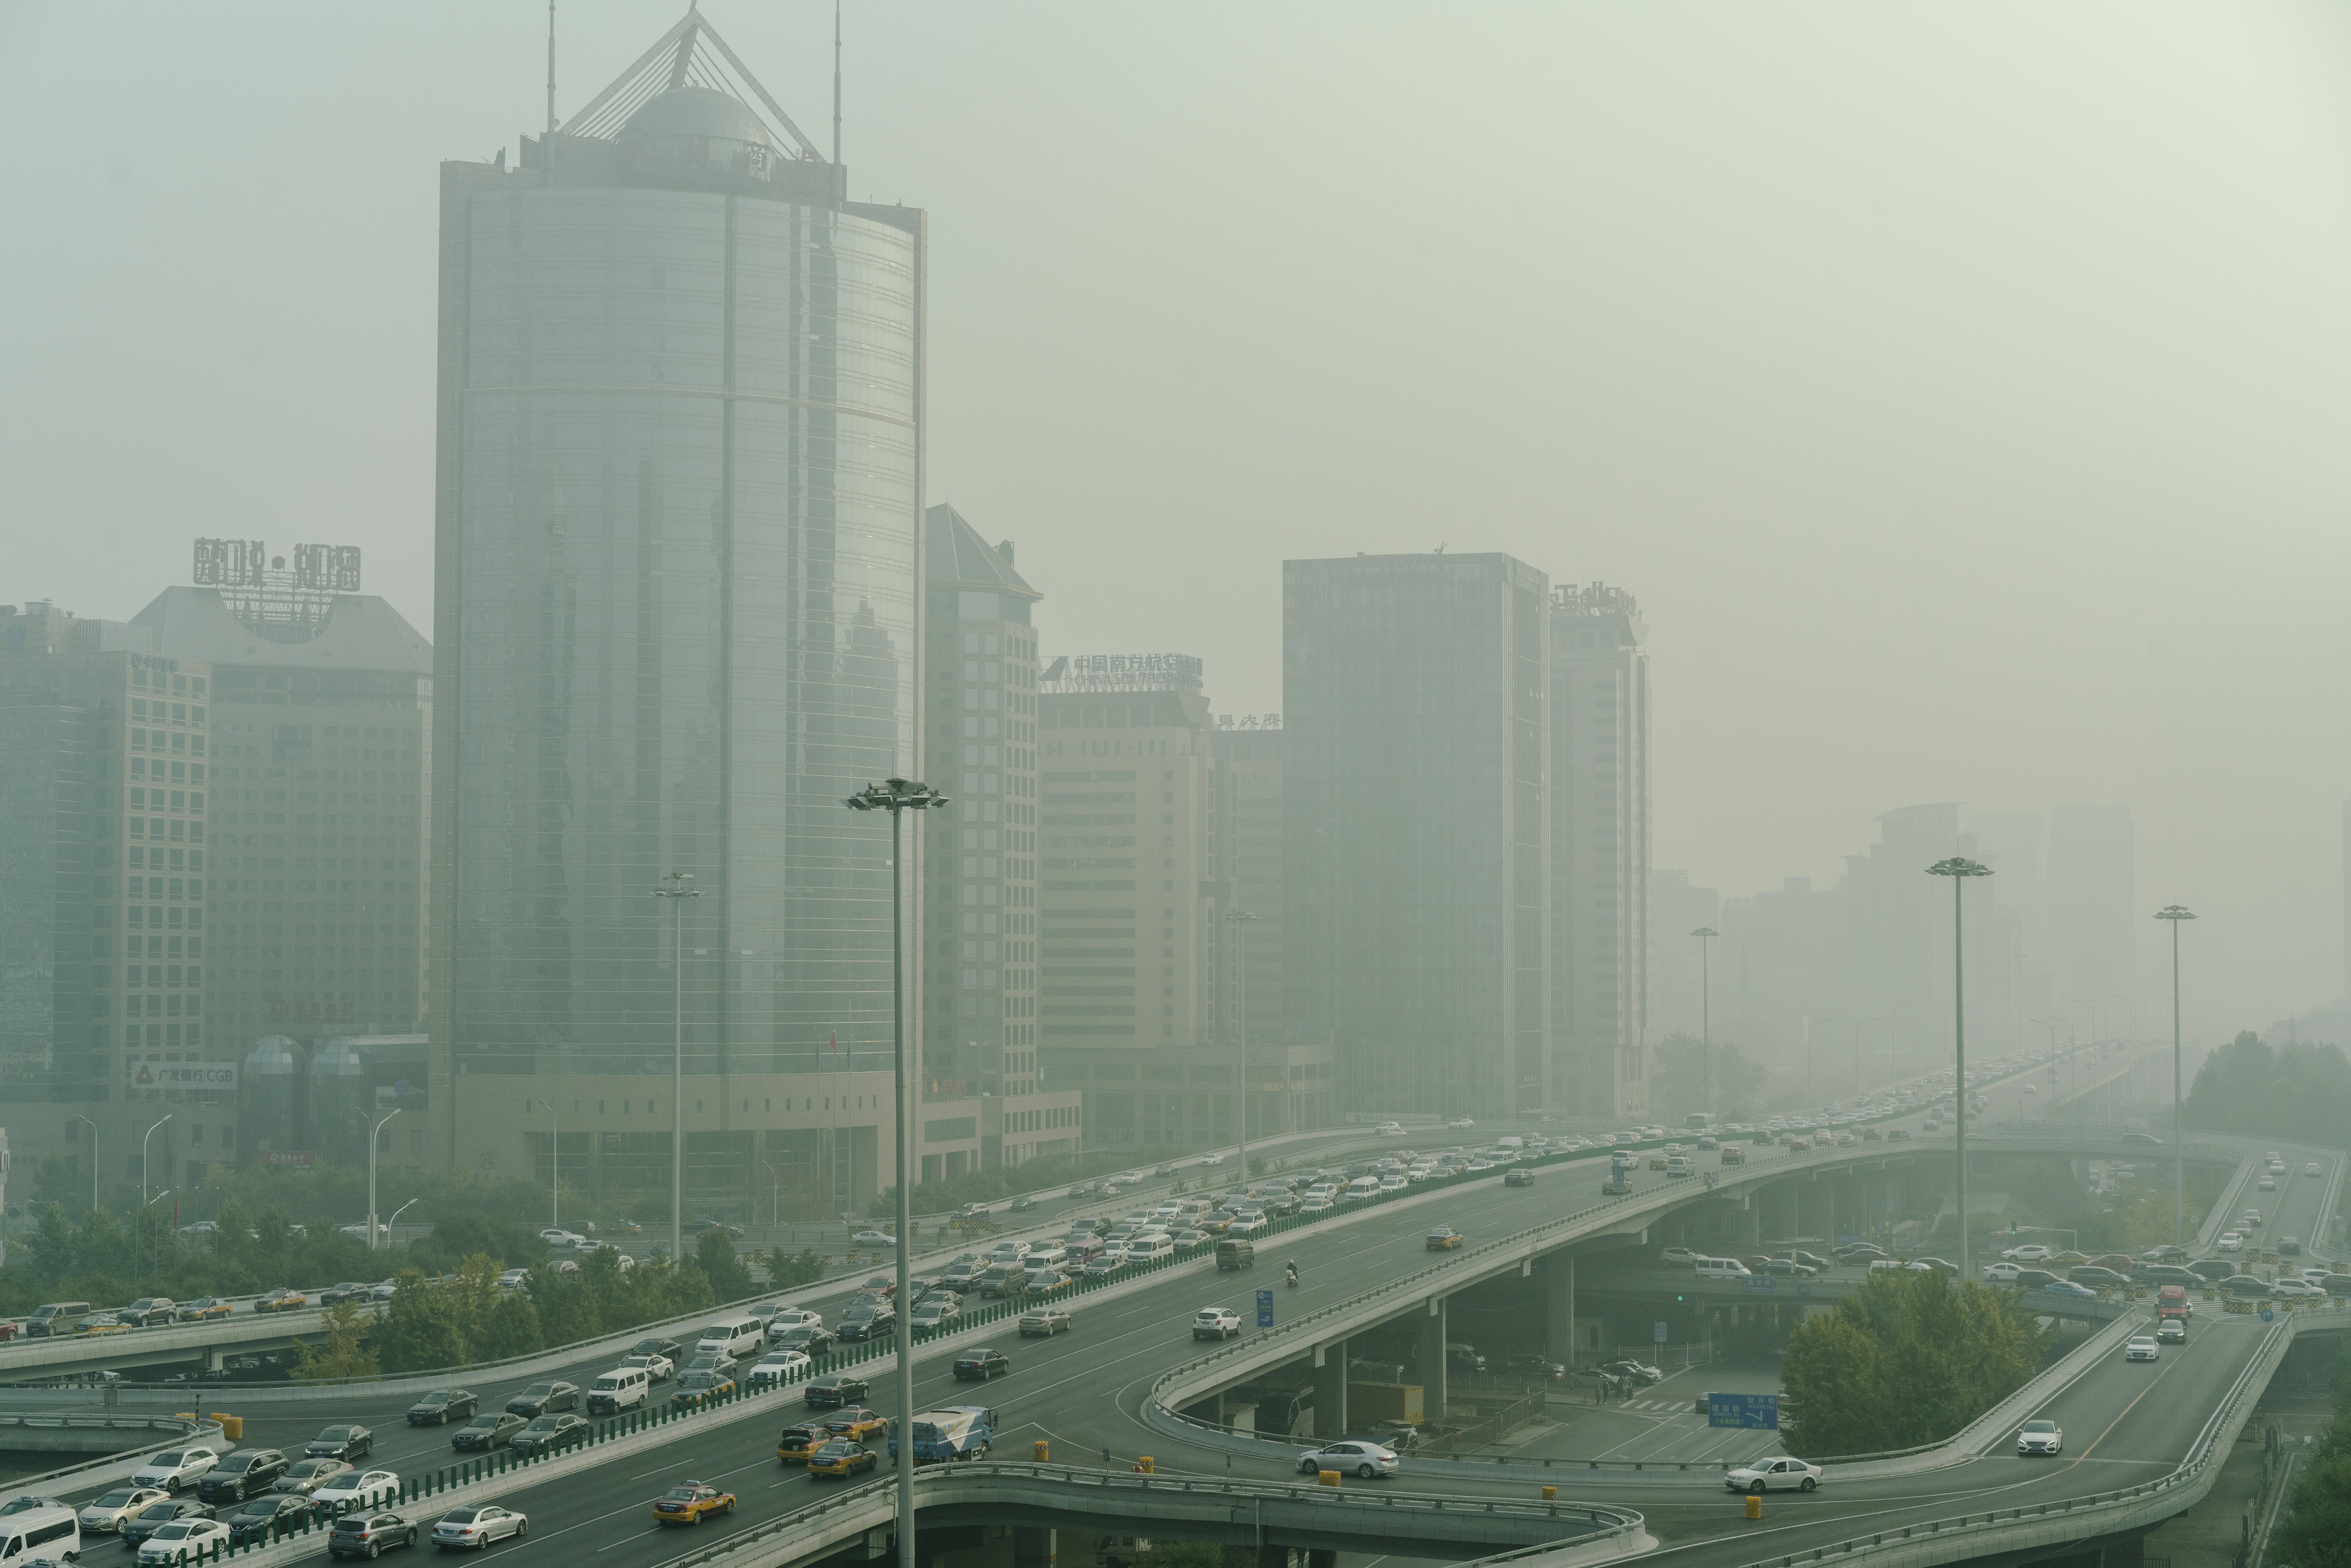 China's recent air pollution levels may be telling a story about the coronavirus impact on its economy